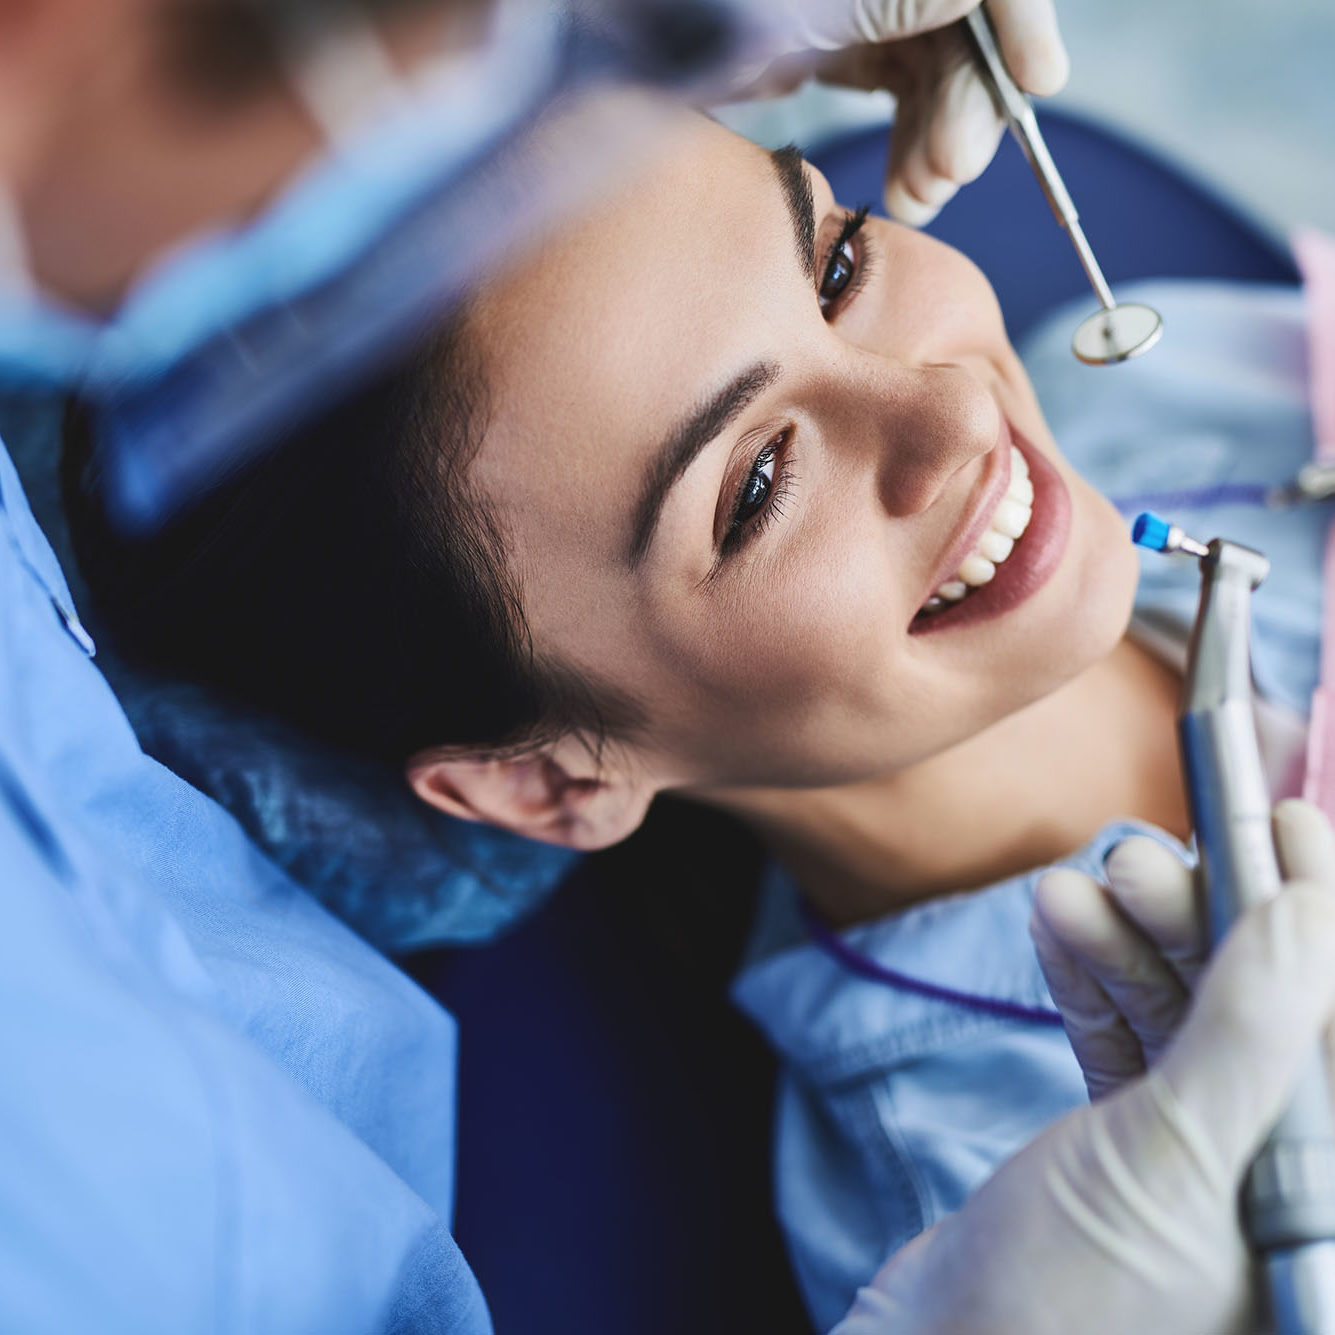 Close up portrait of charming woman sitting in dental chair while stomatologist holding polisher and mirror. Girl is smiling